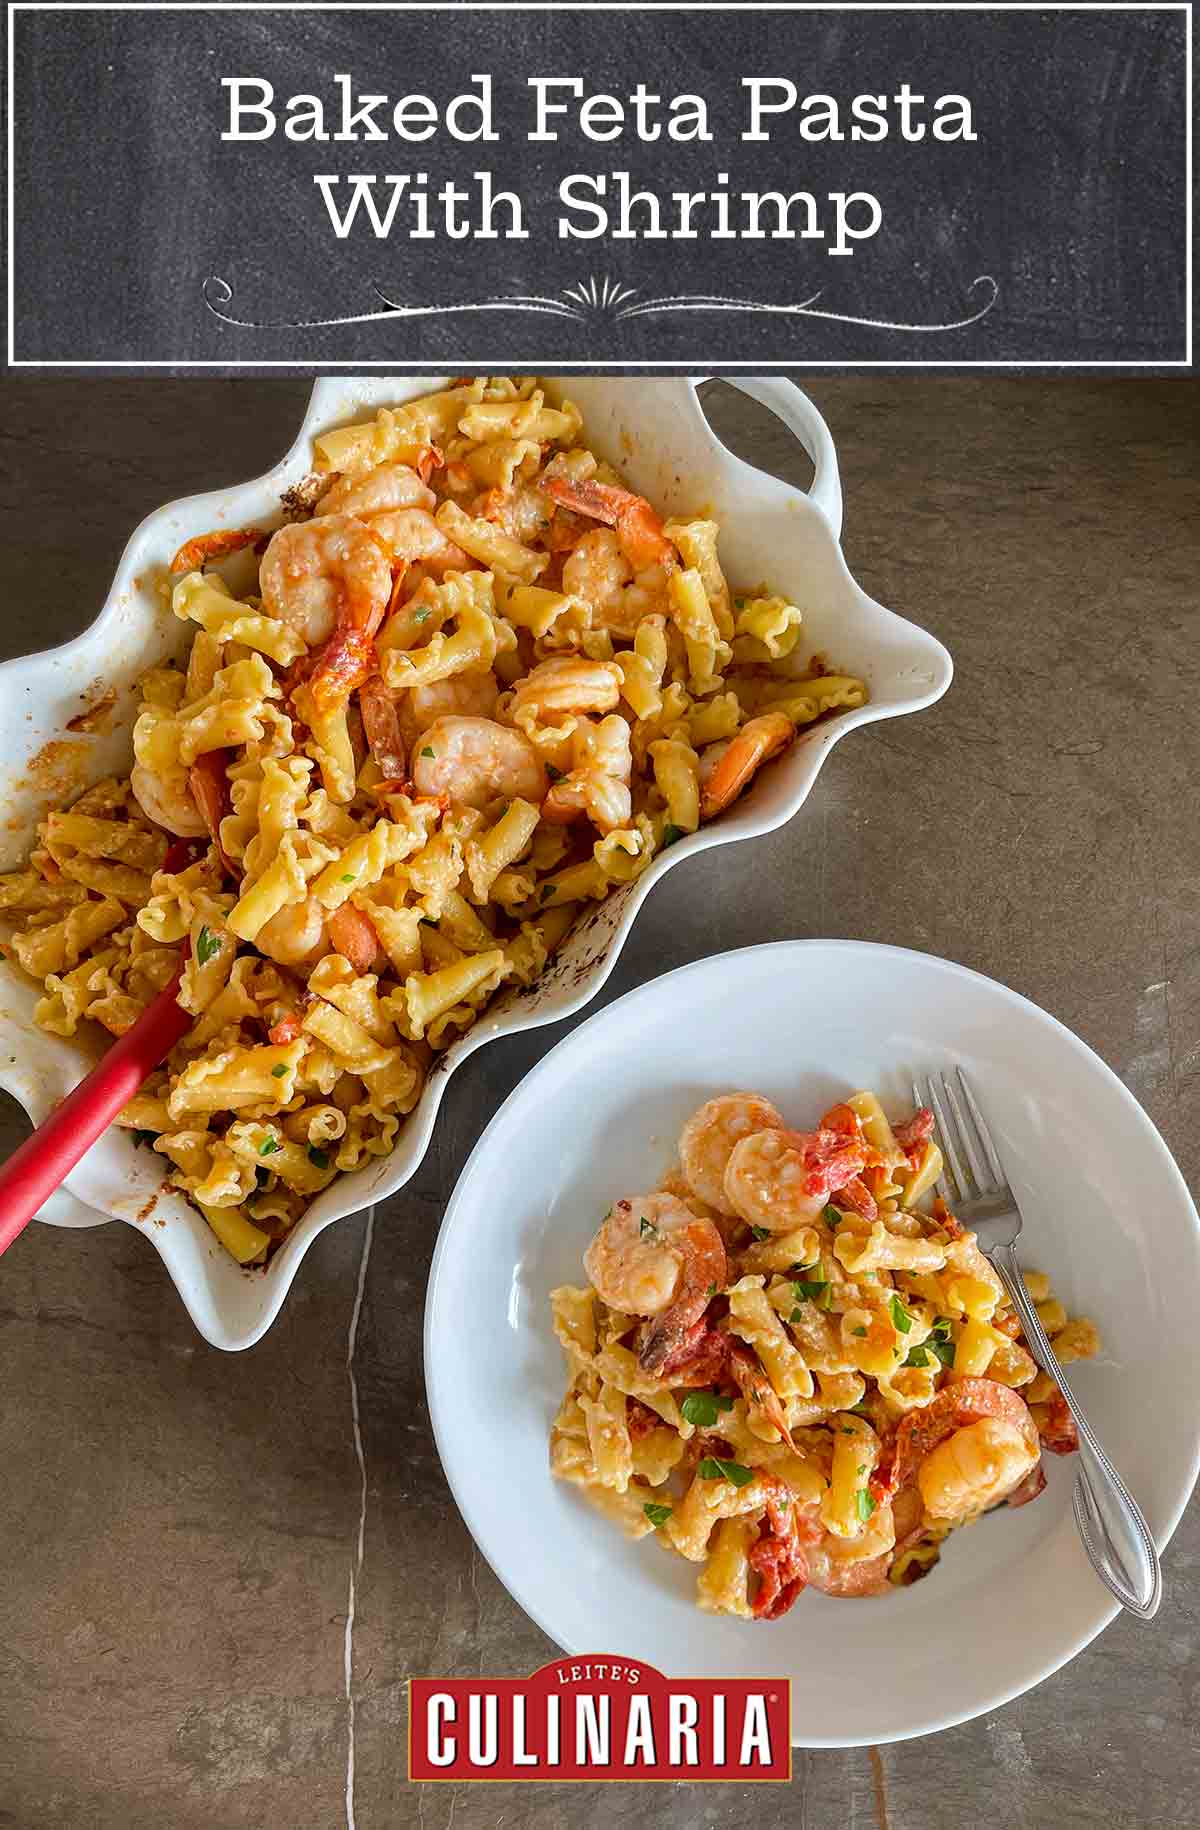 A serving dish and bowl both filled with baked pasta with shrimp, feta, and tomatoes, with a fork on the side.